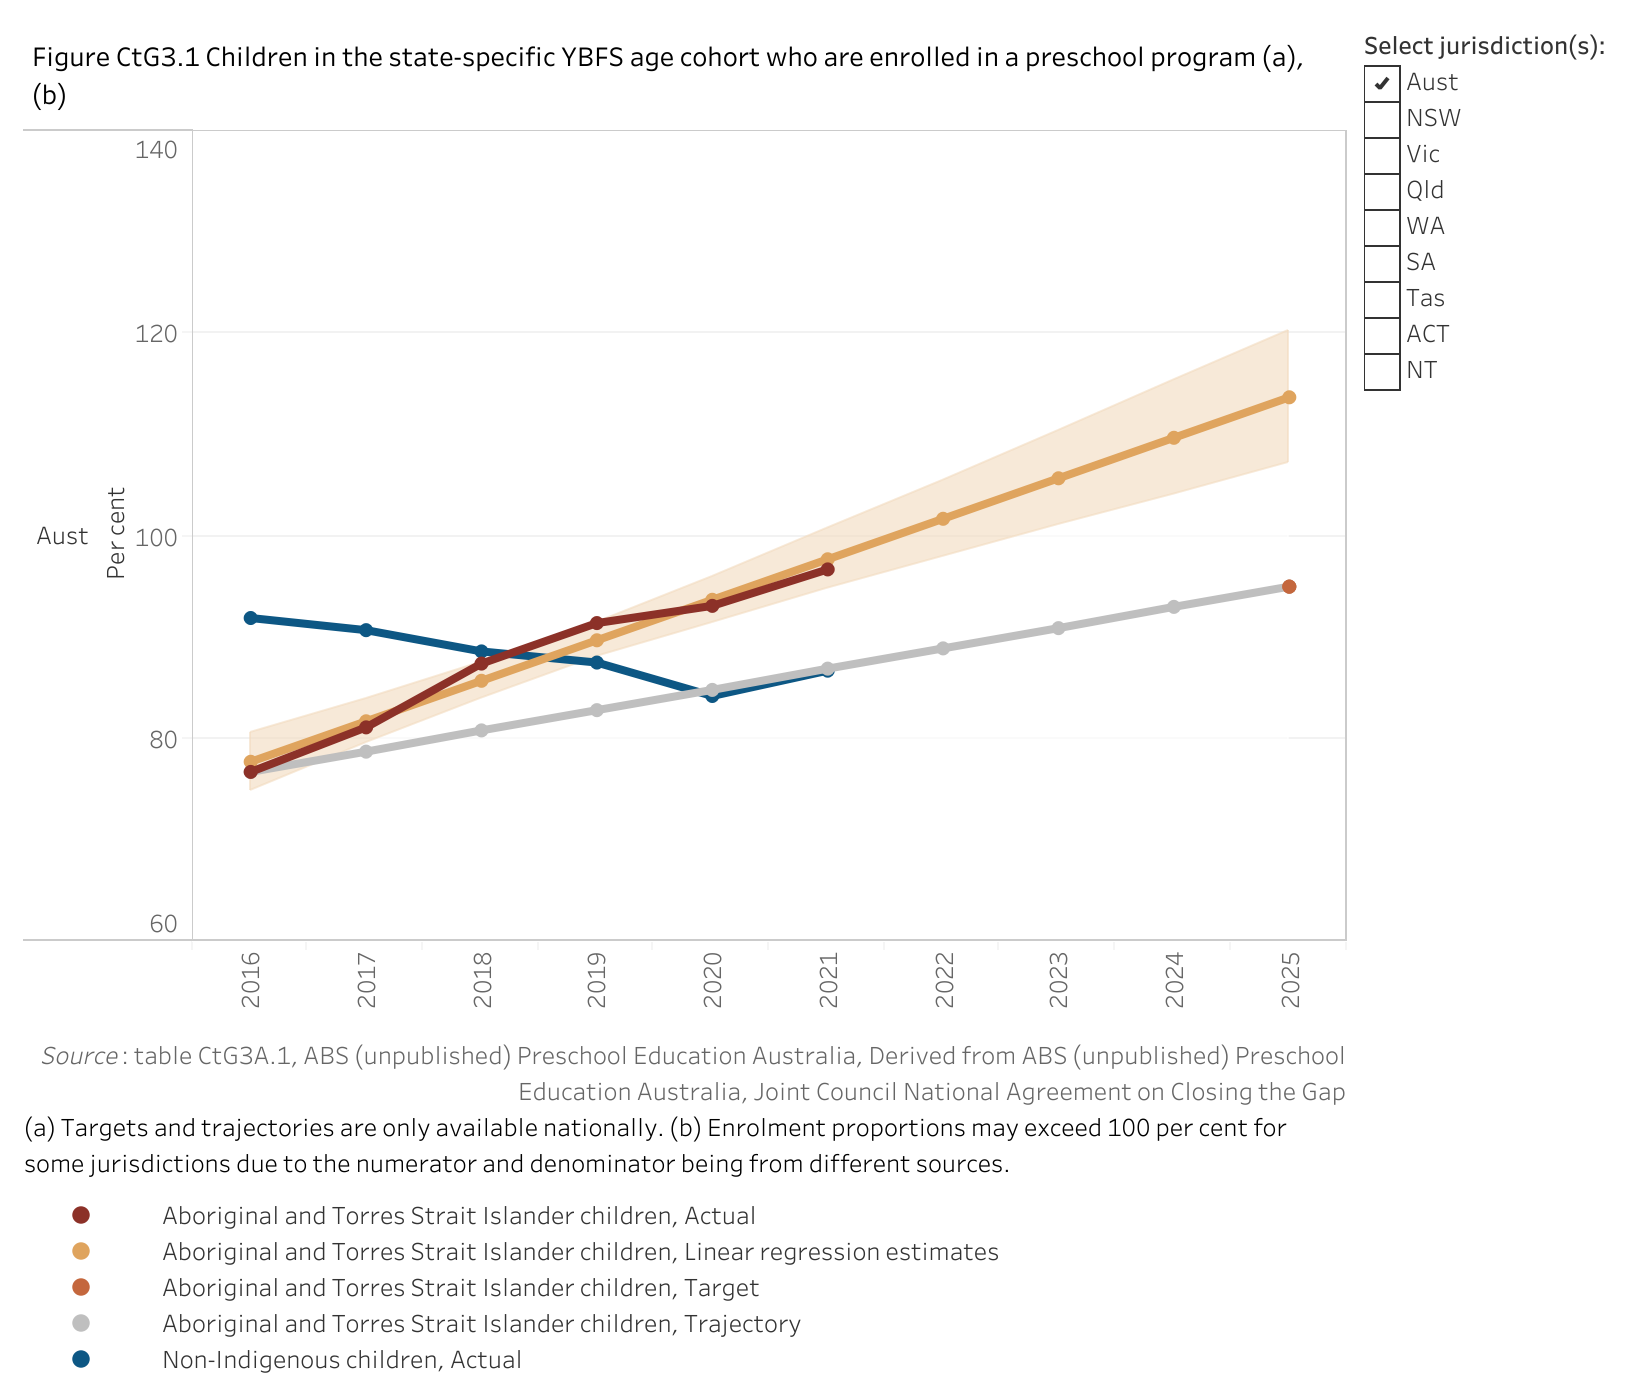 Figure CtG3.1. Line chart showing the proportion of Aboriginal and Torres Strait Islander children and non-Indigenous children in the Year Before Full time Schooling age cohort who are enrolled in a preschool program. Along with these proportions, a linear regression is displayed that shows the data trend for the target and confidence intervals are also displayed around the trend providing an indication of its reliability. The aim under Closing the Gap is to increase the proportion for Aboriginal and Torres Strait Islander children from a 2016 baseline value of 76.7 per cent to a target value of 95 per cent by 2025.